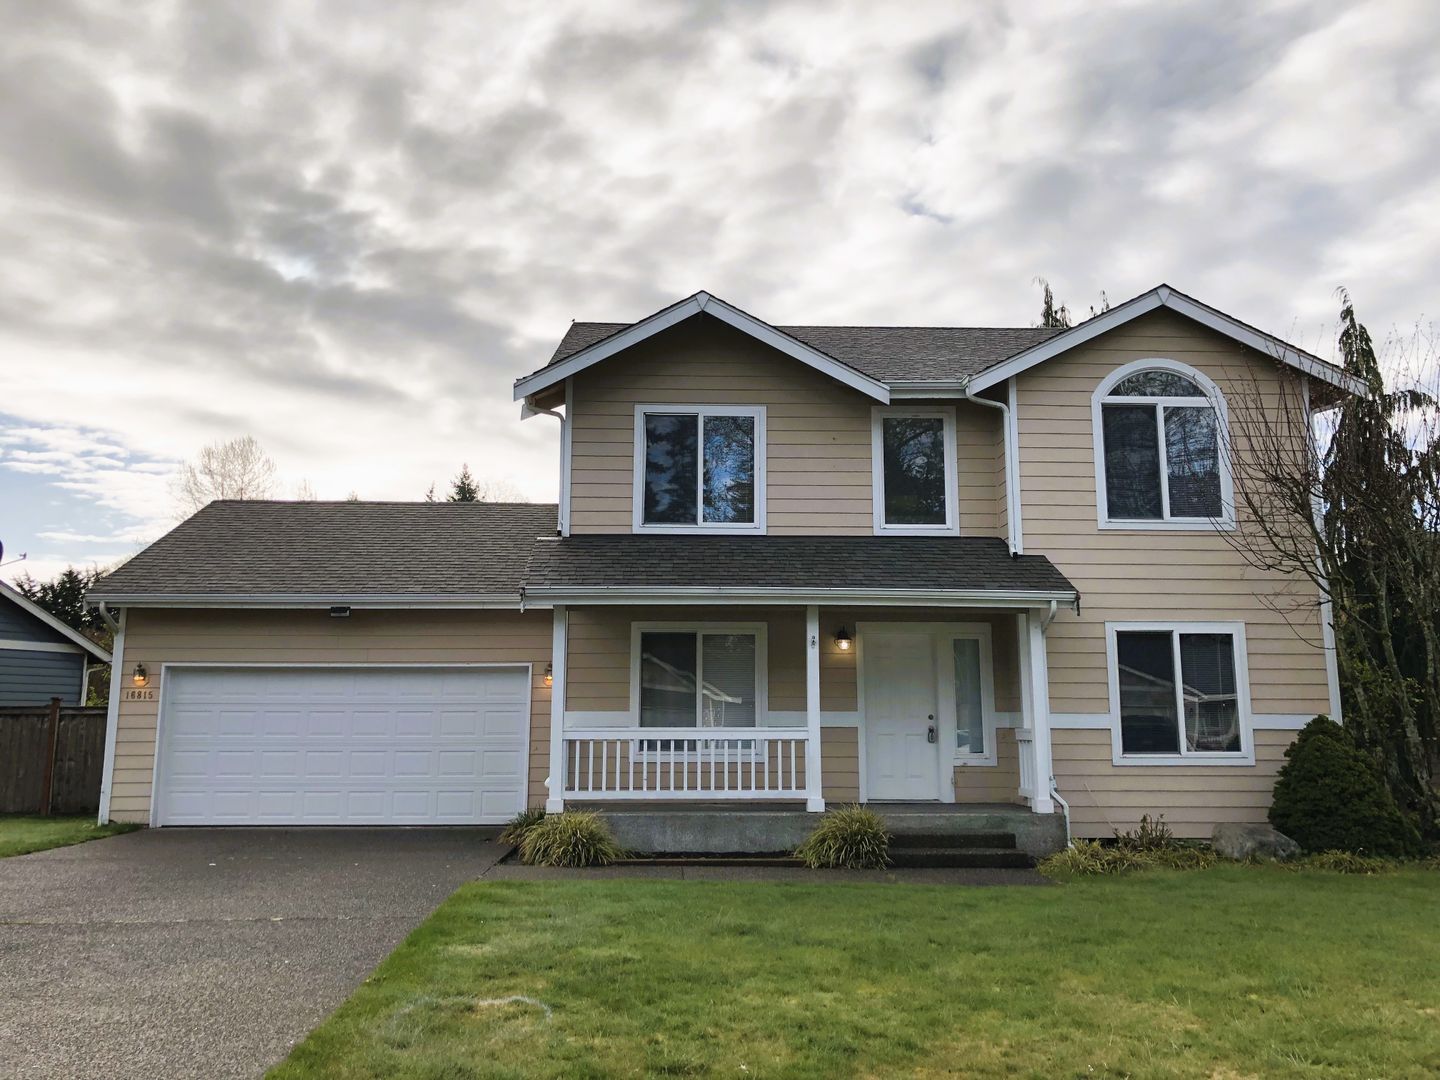 3 Bedroom Puyallup Single Family Home